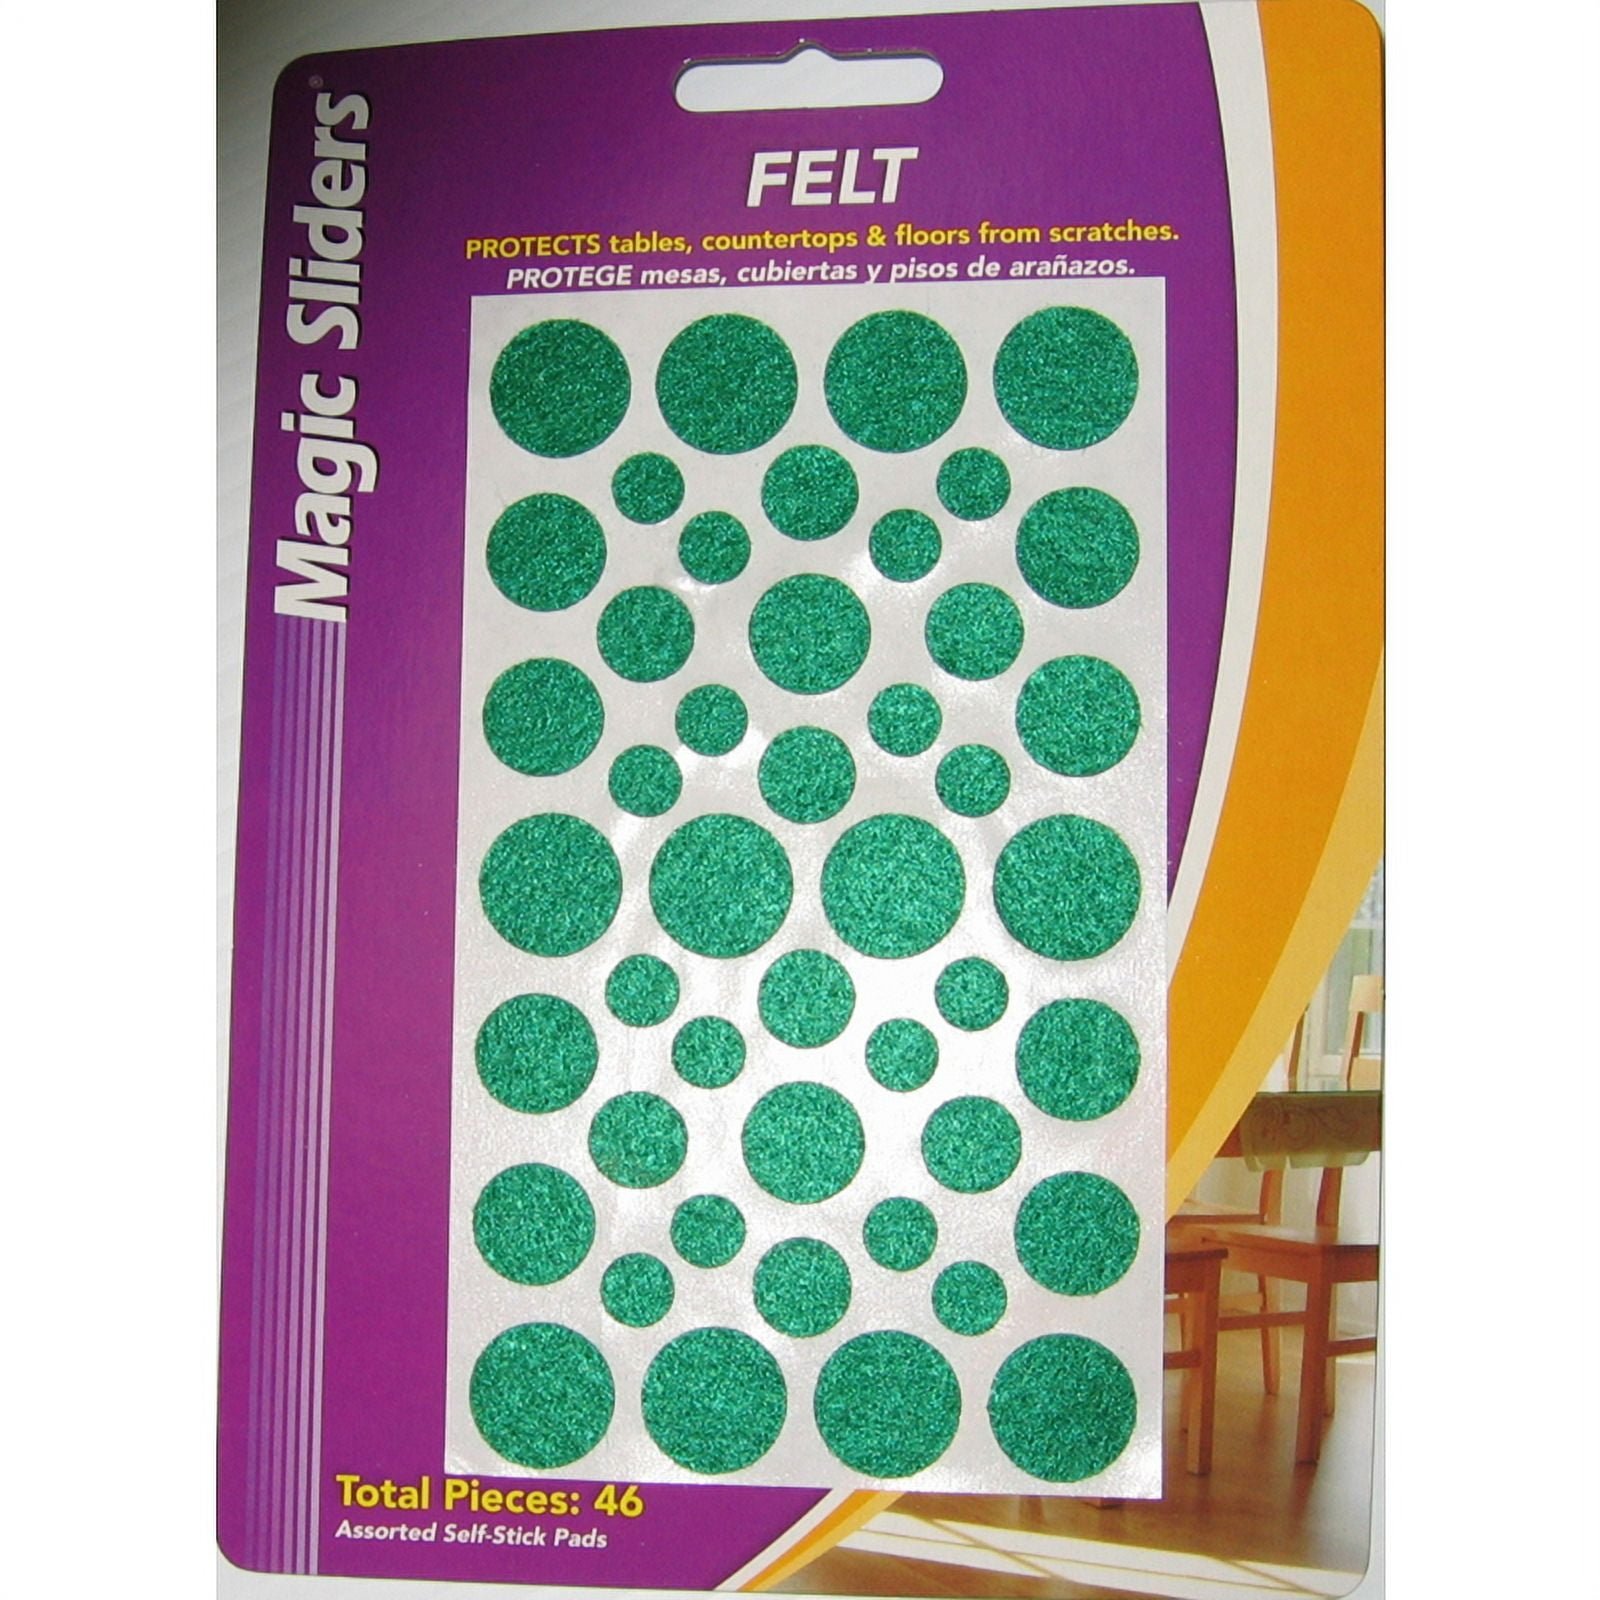 5865639 Green Felt Protective Pads - 46 Per Pack & Pack Of 6